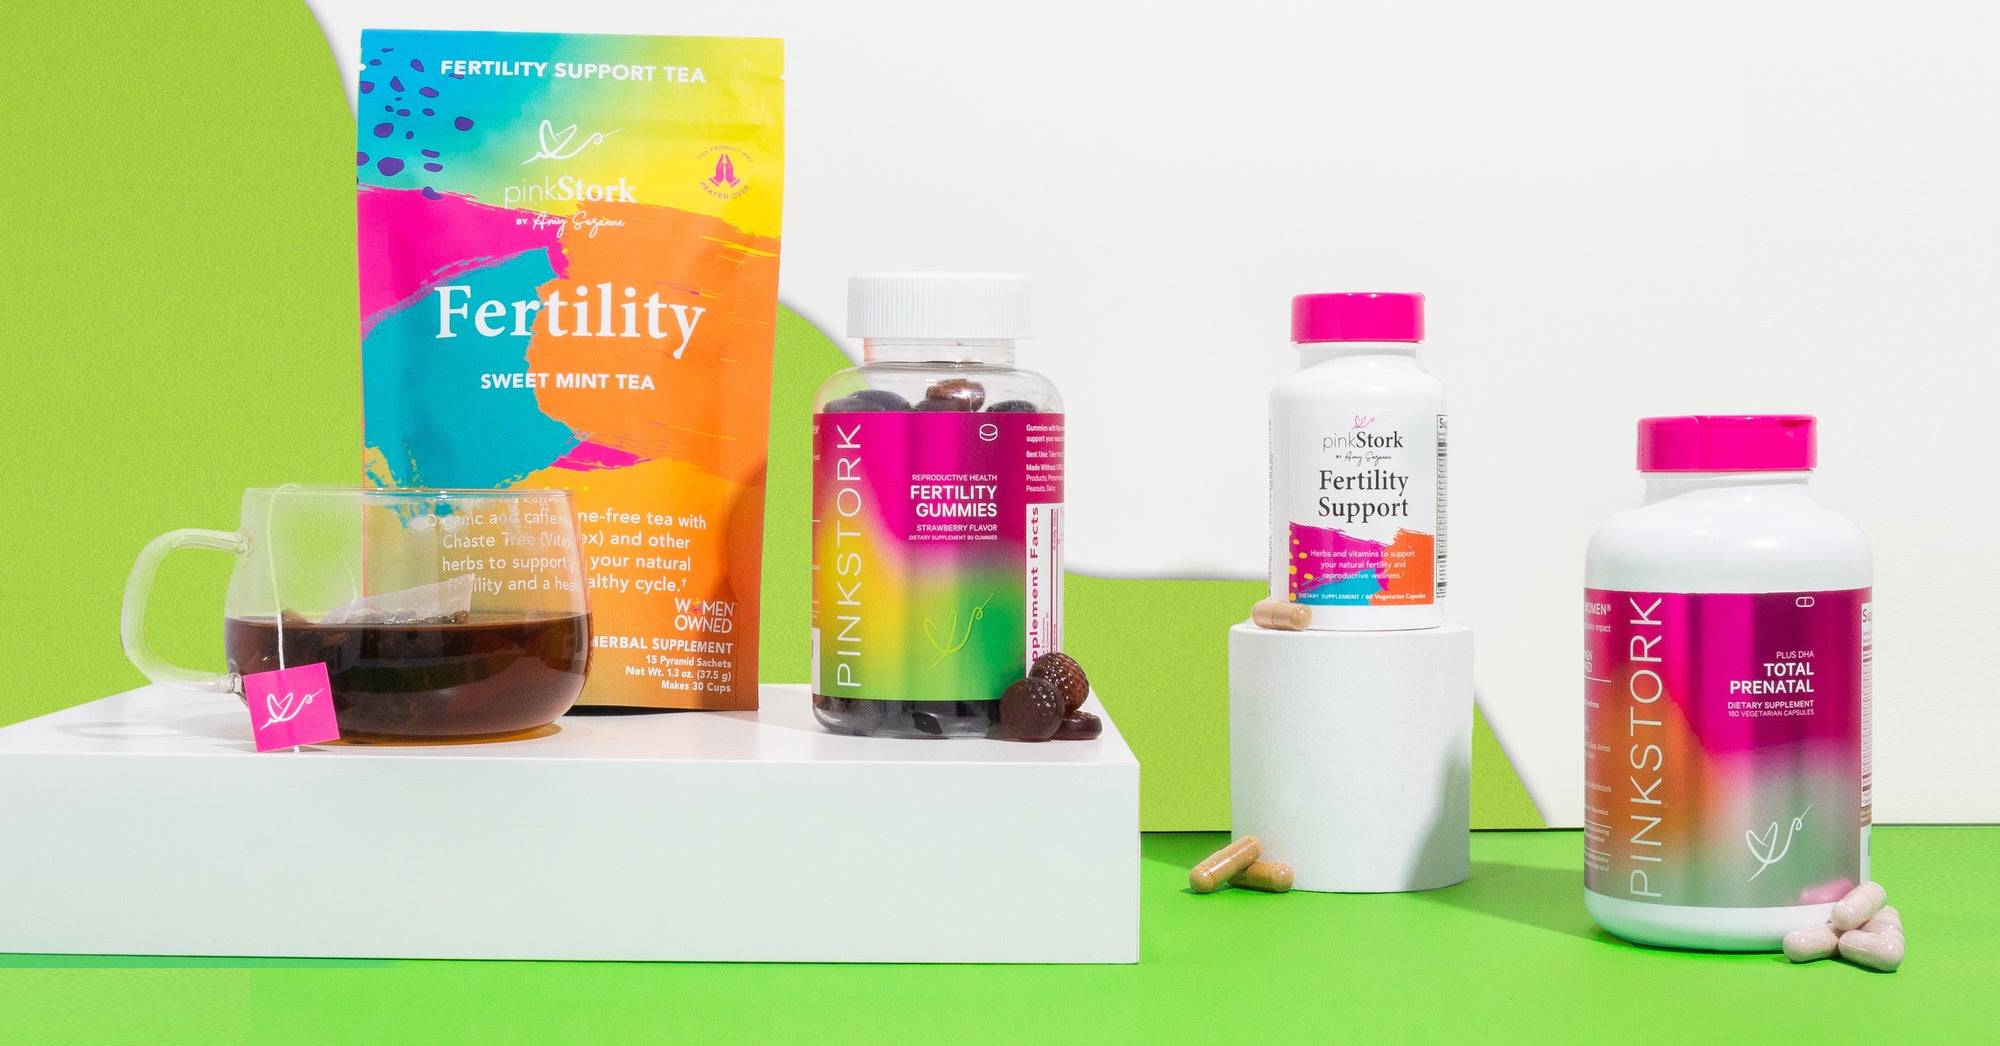 Have questions about our Fertility products? We have answers.